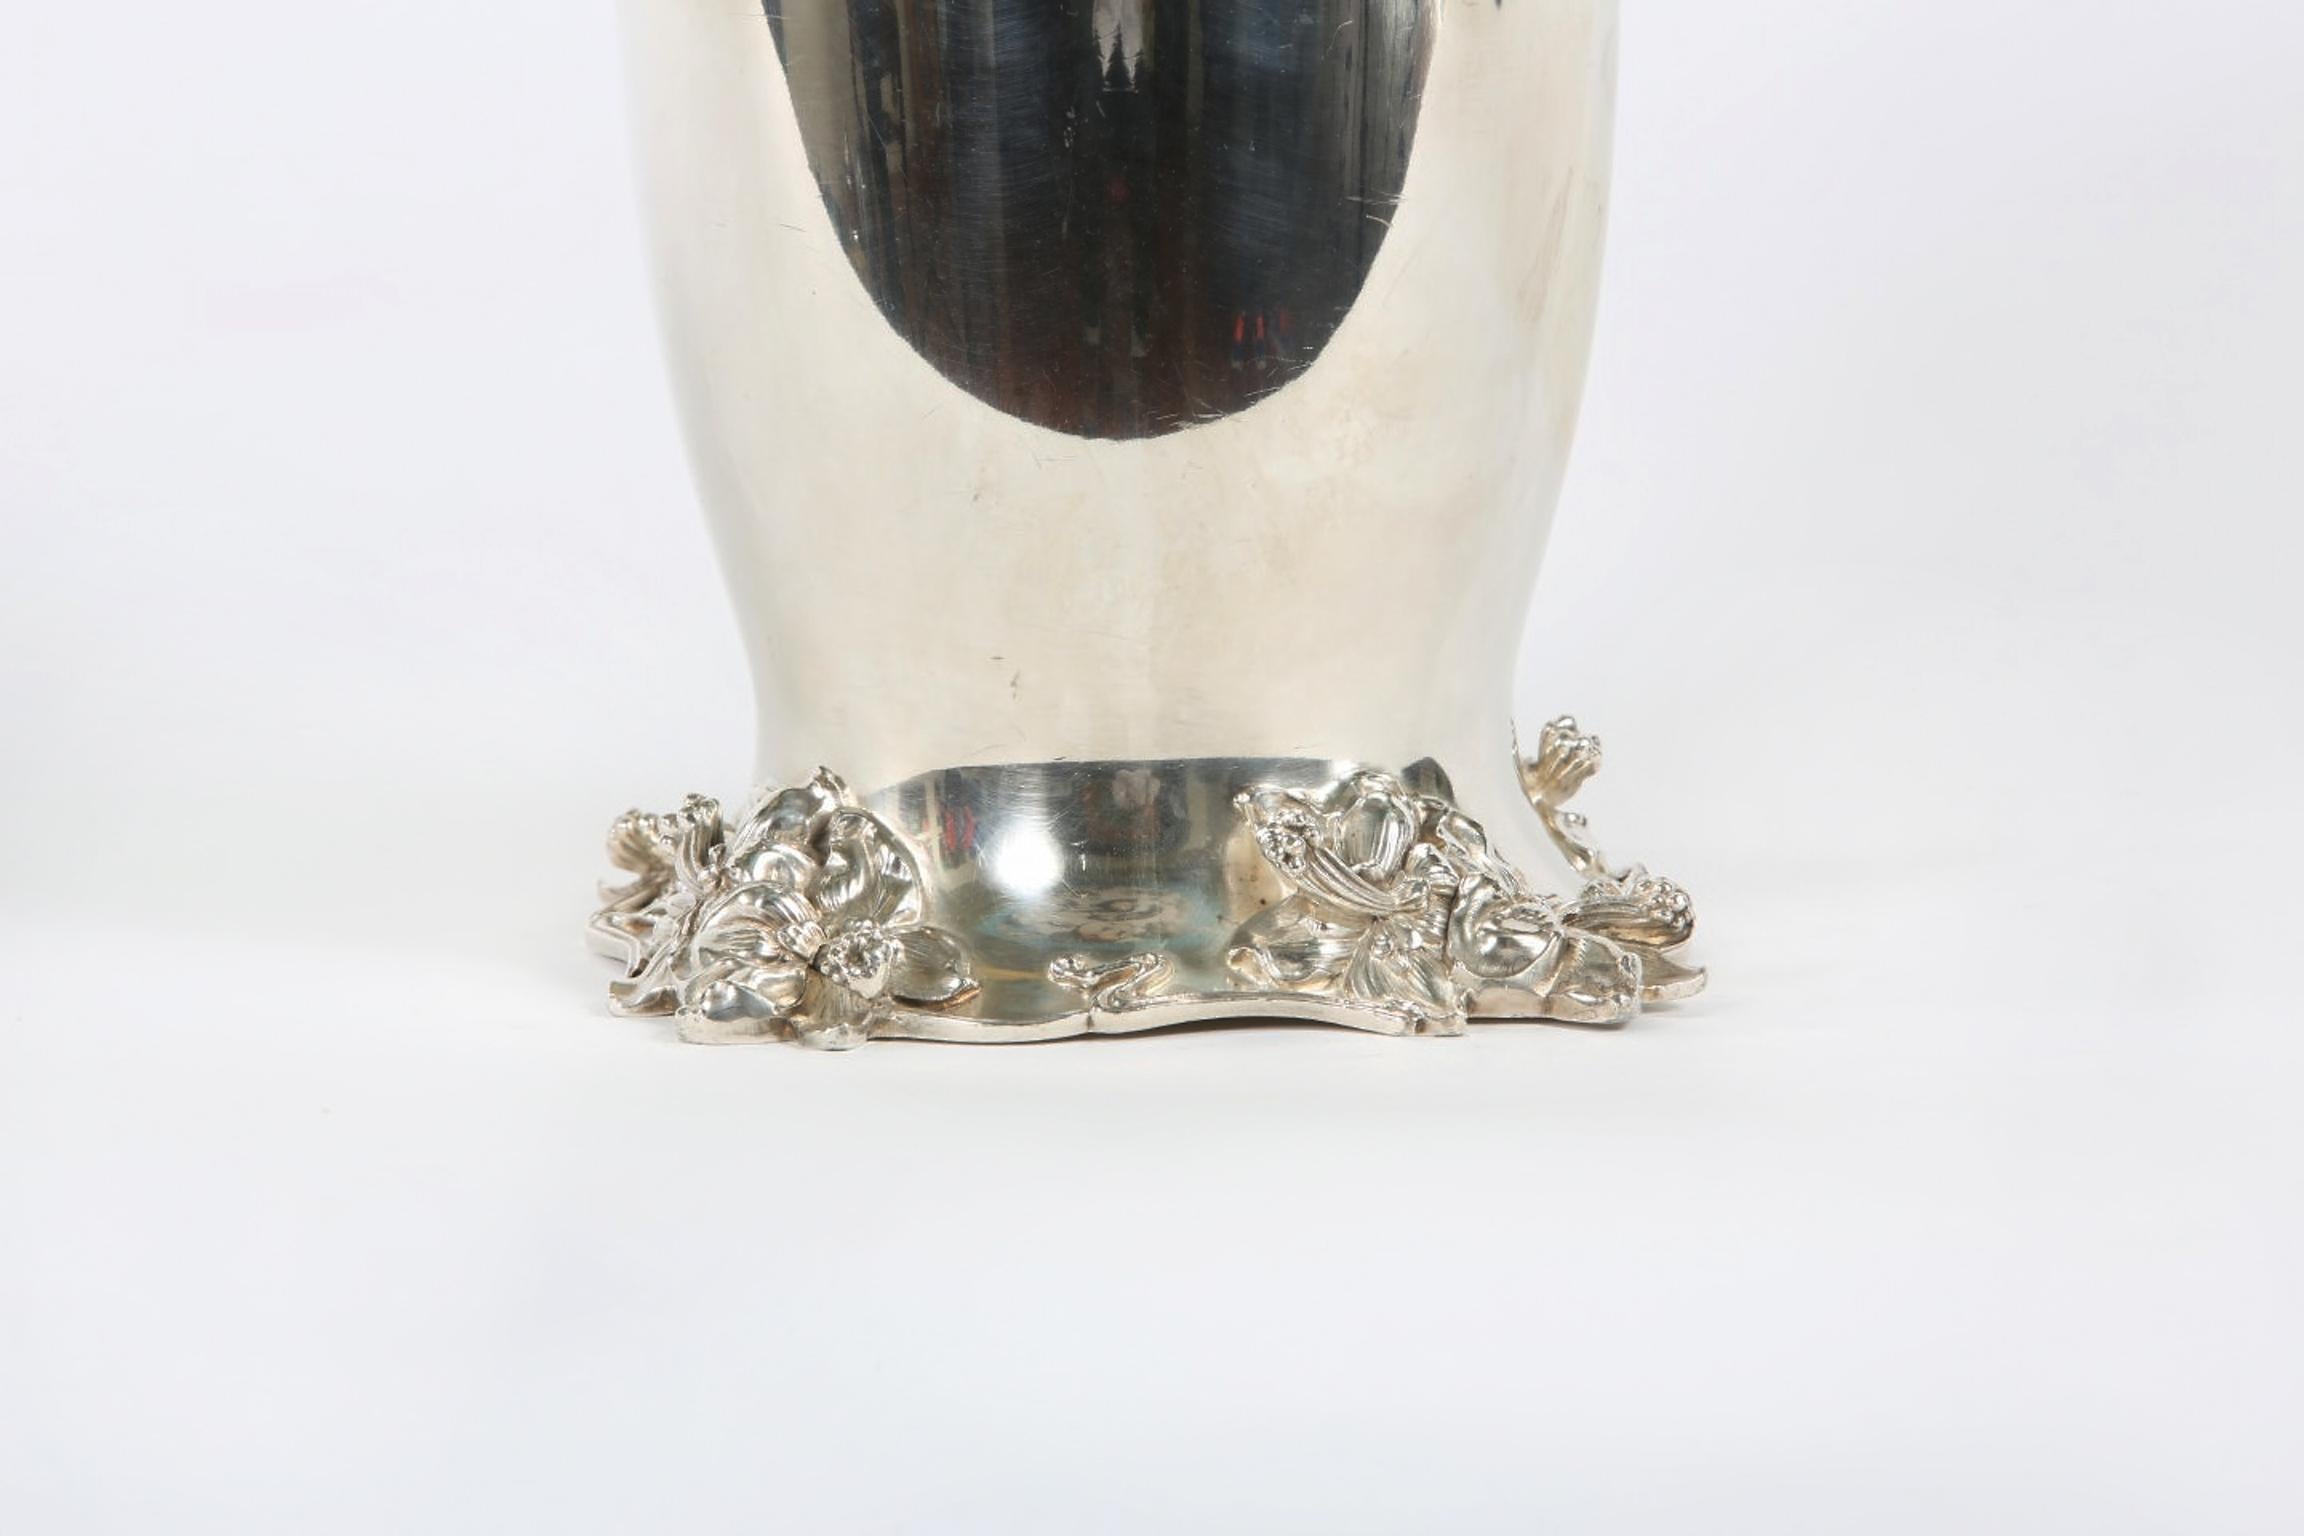 Early 20th Century Art Nouveau Silver Plated Cooler / Ice Bucket